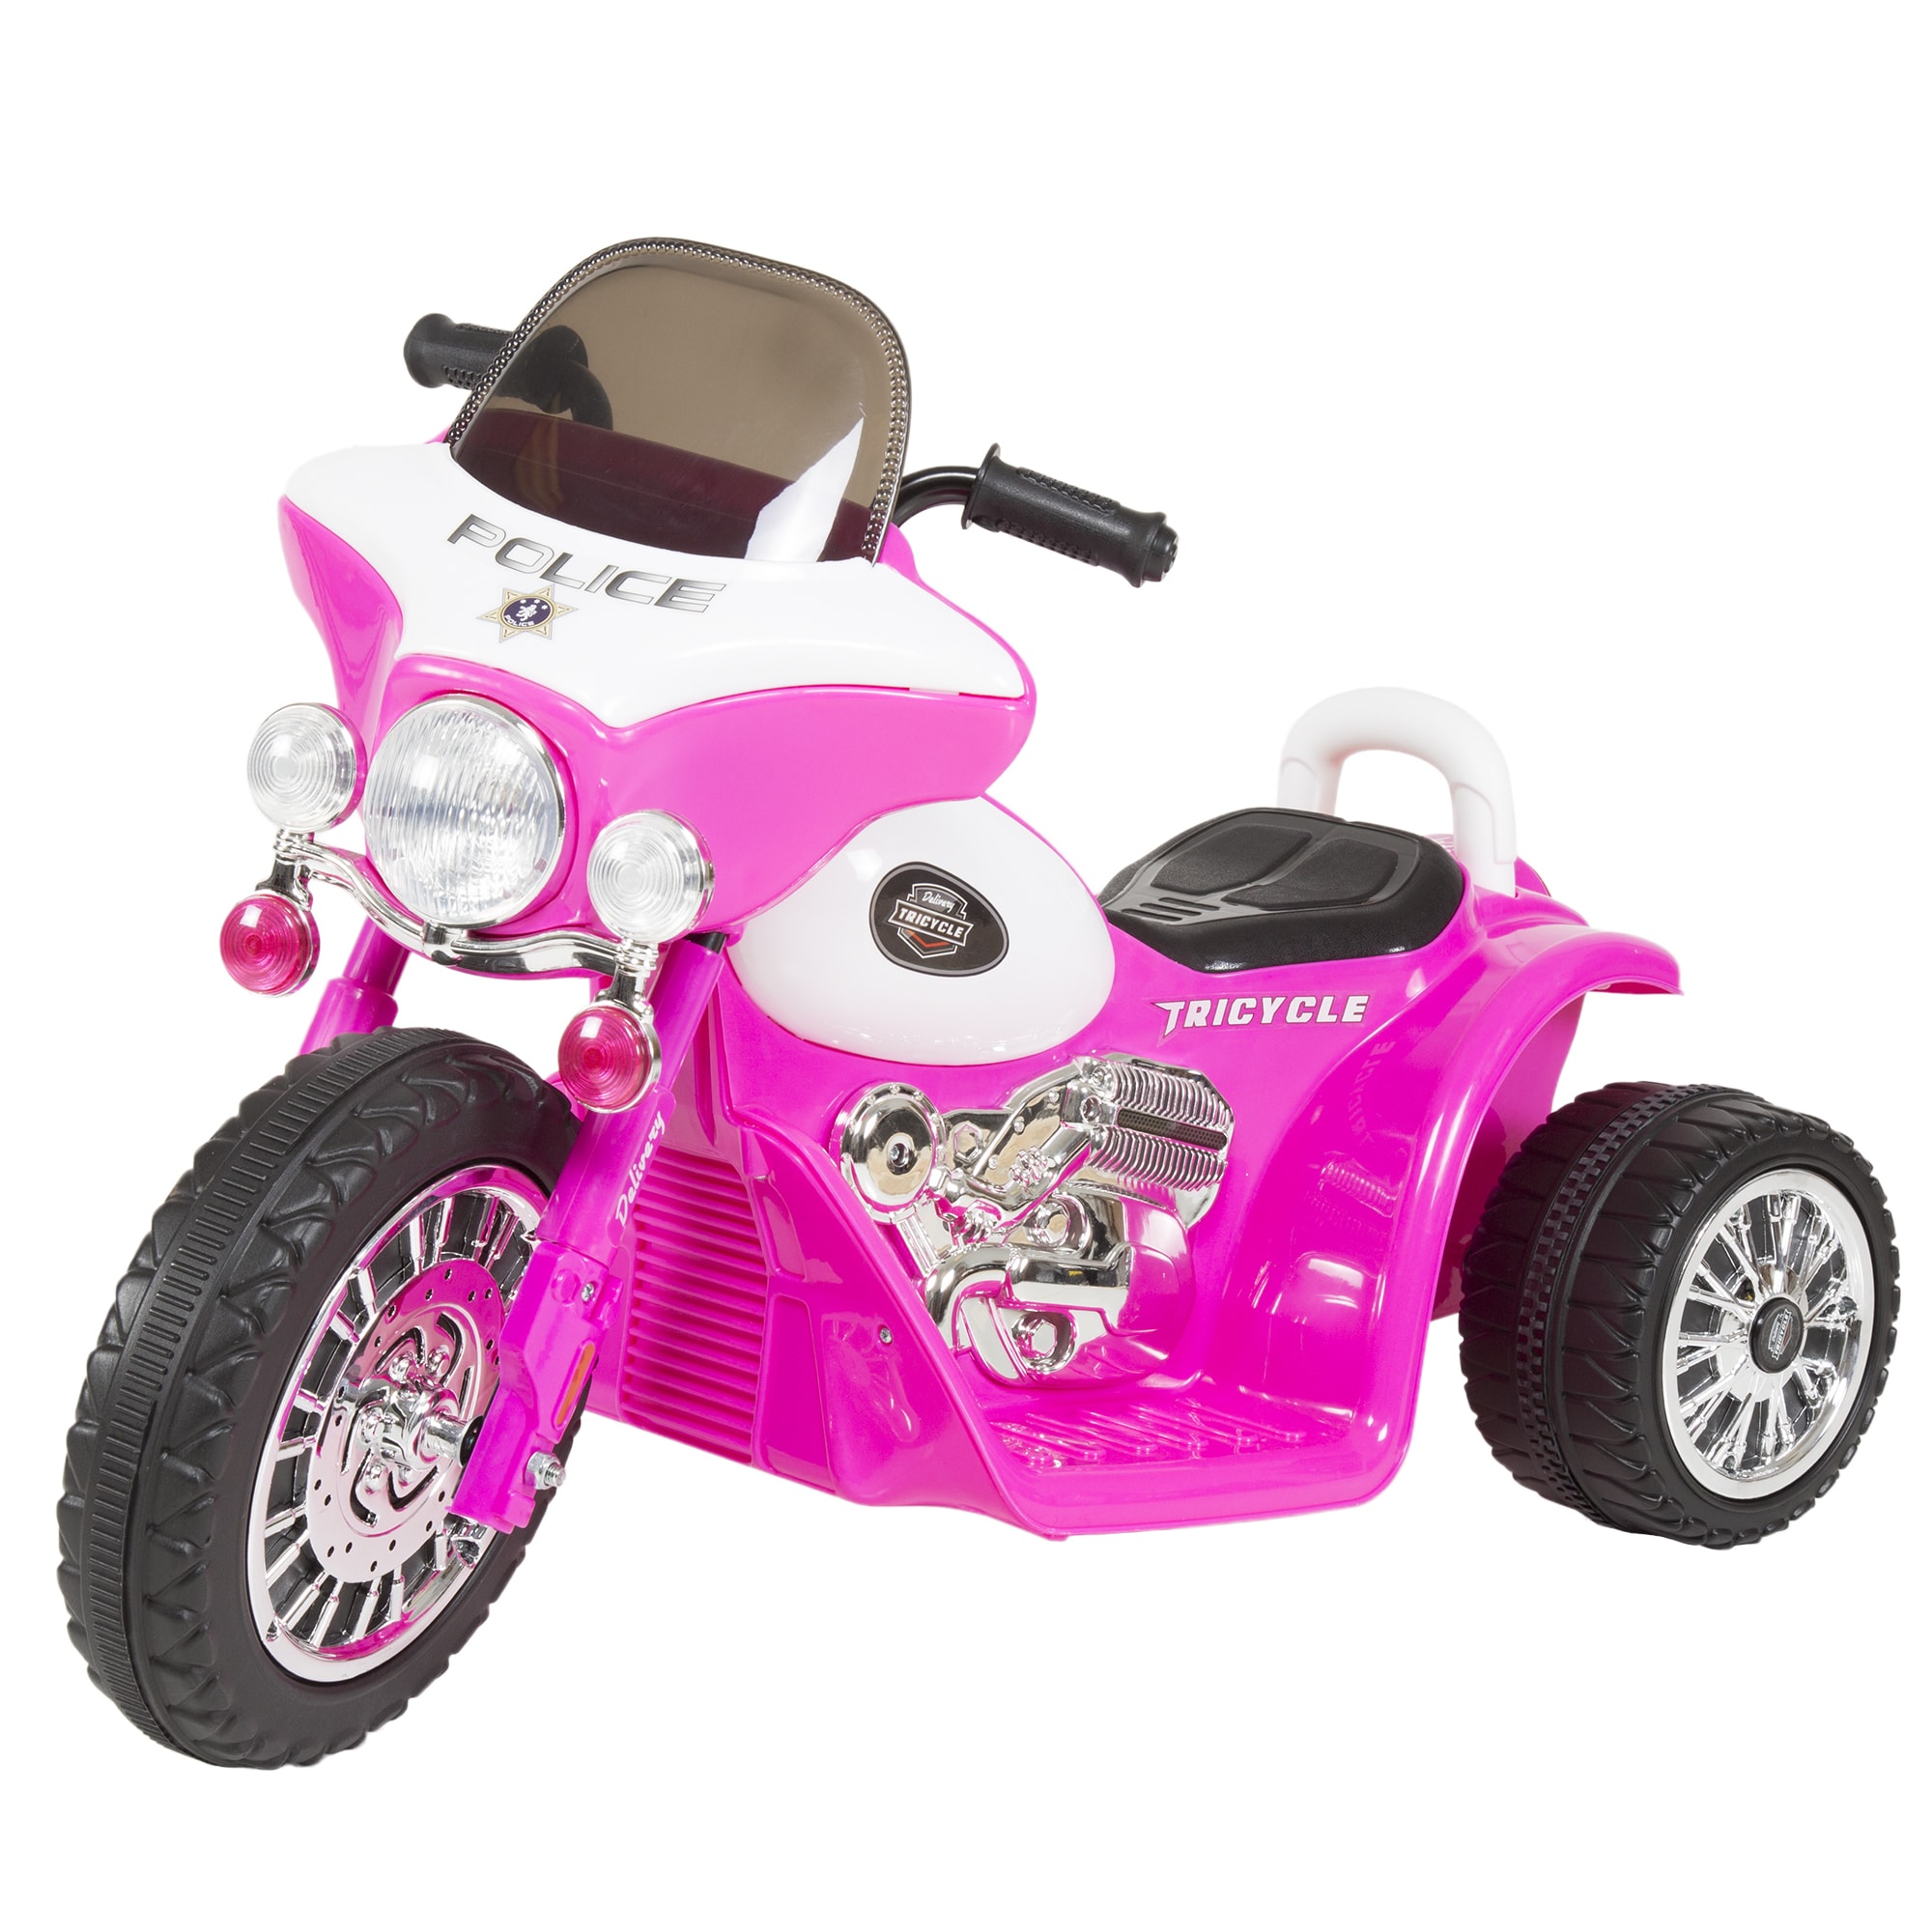 motorcycles that kids can drive